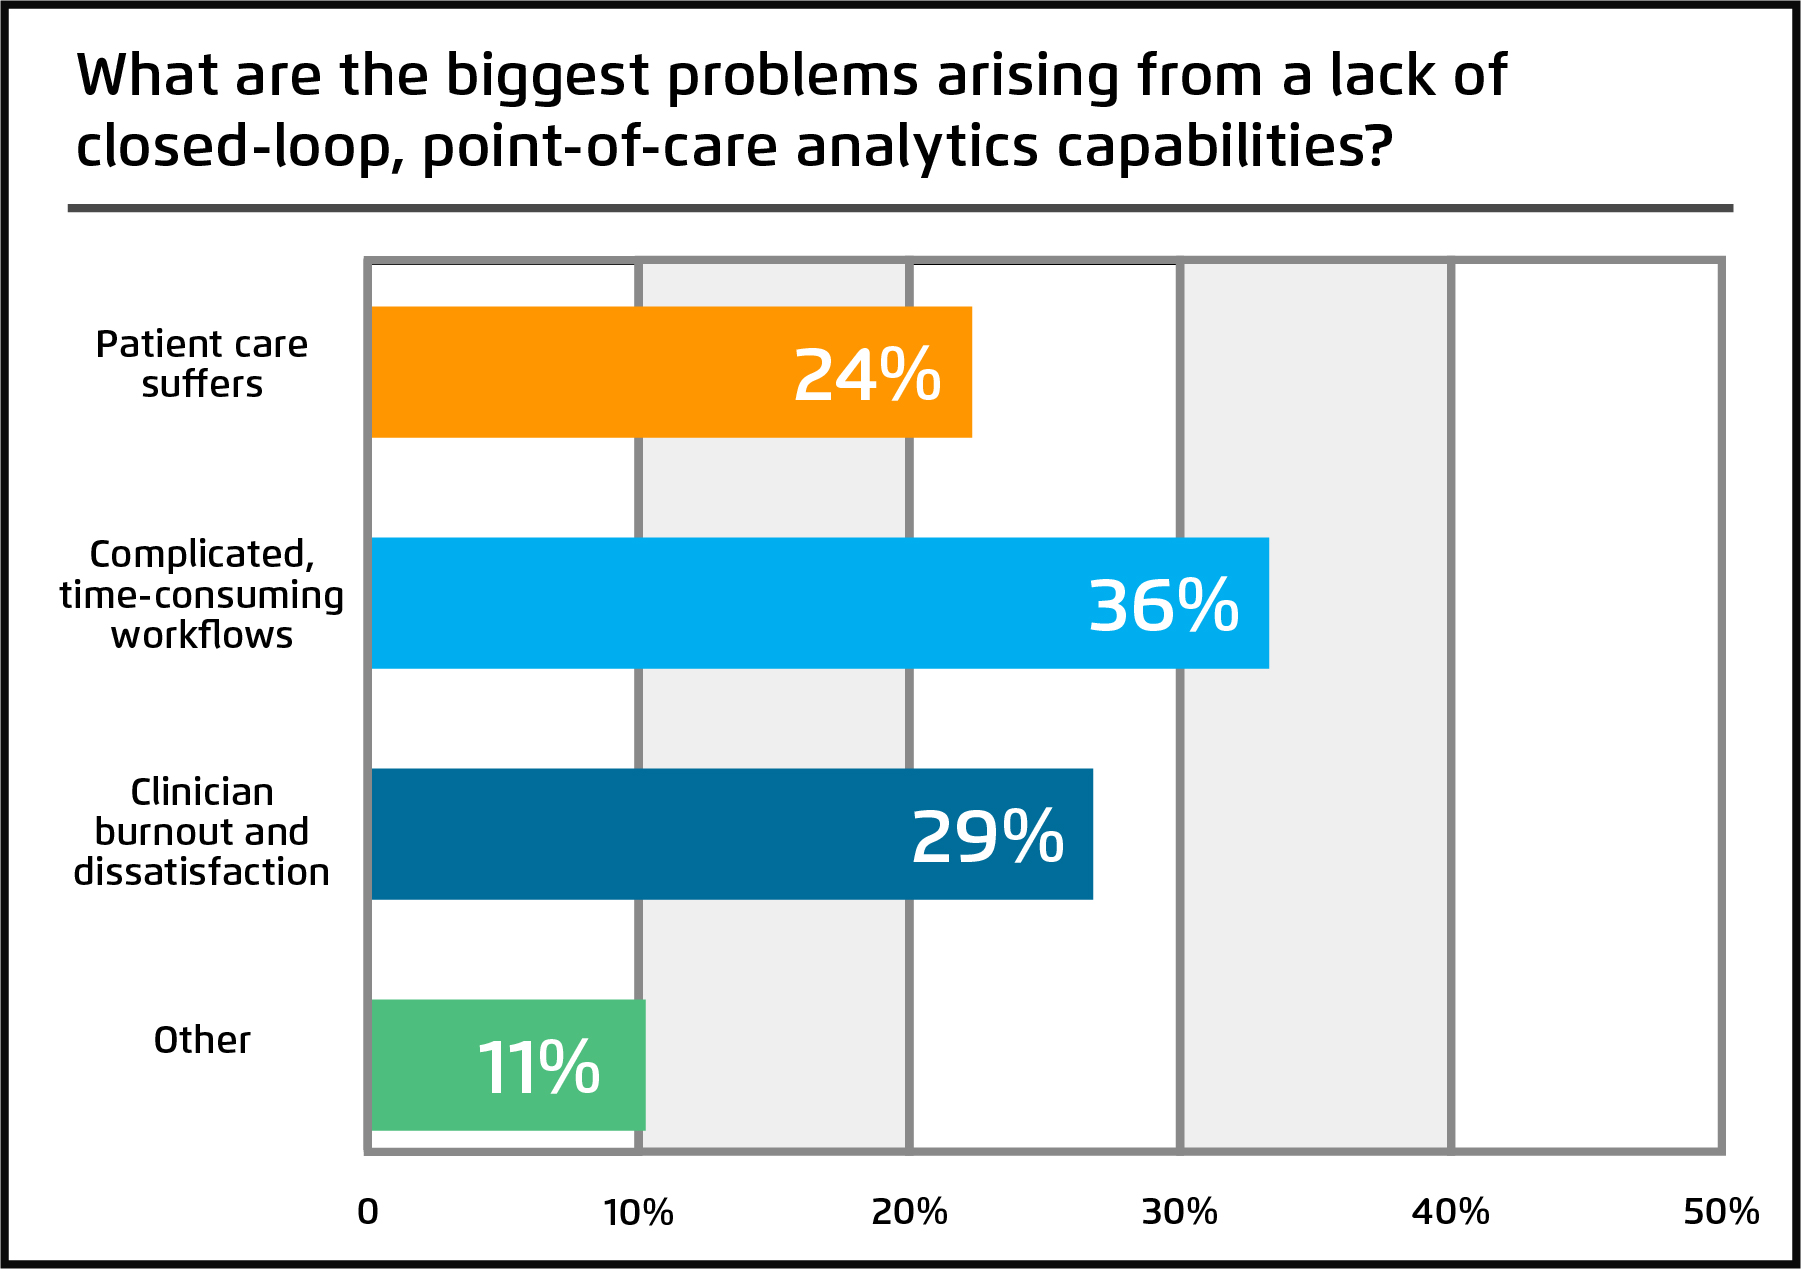 Chart showing the biggest problems arising from a lack of closed-loop, point-of-care capabilities